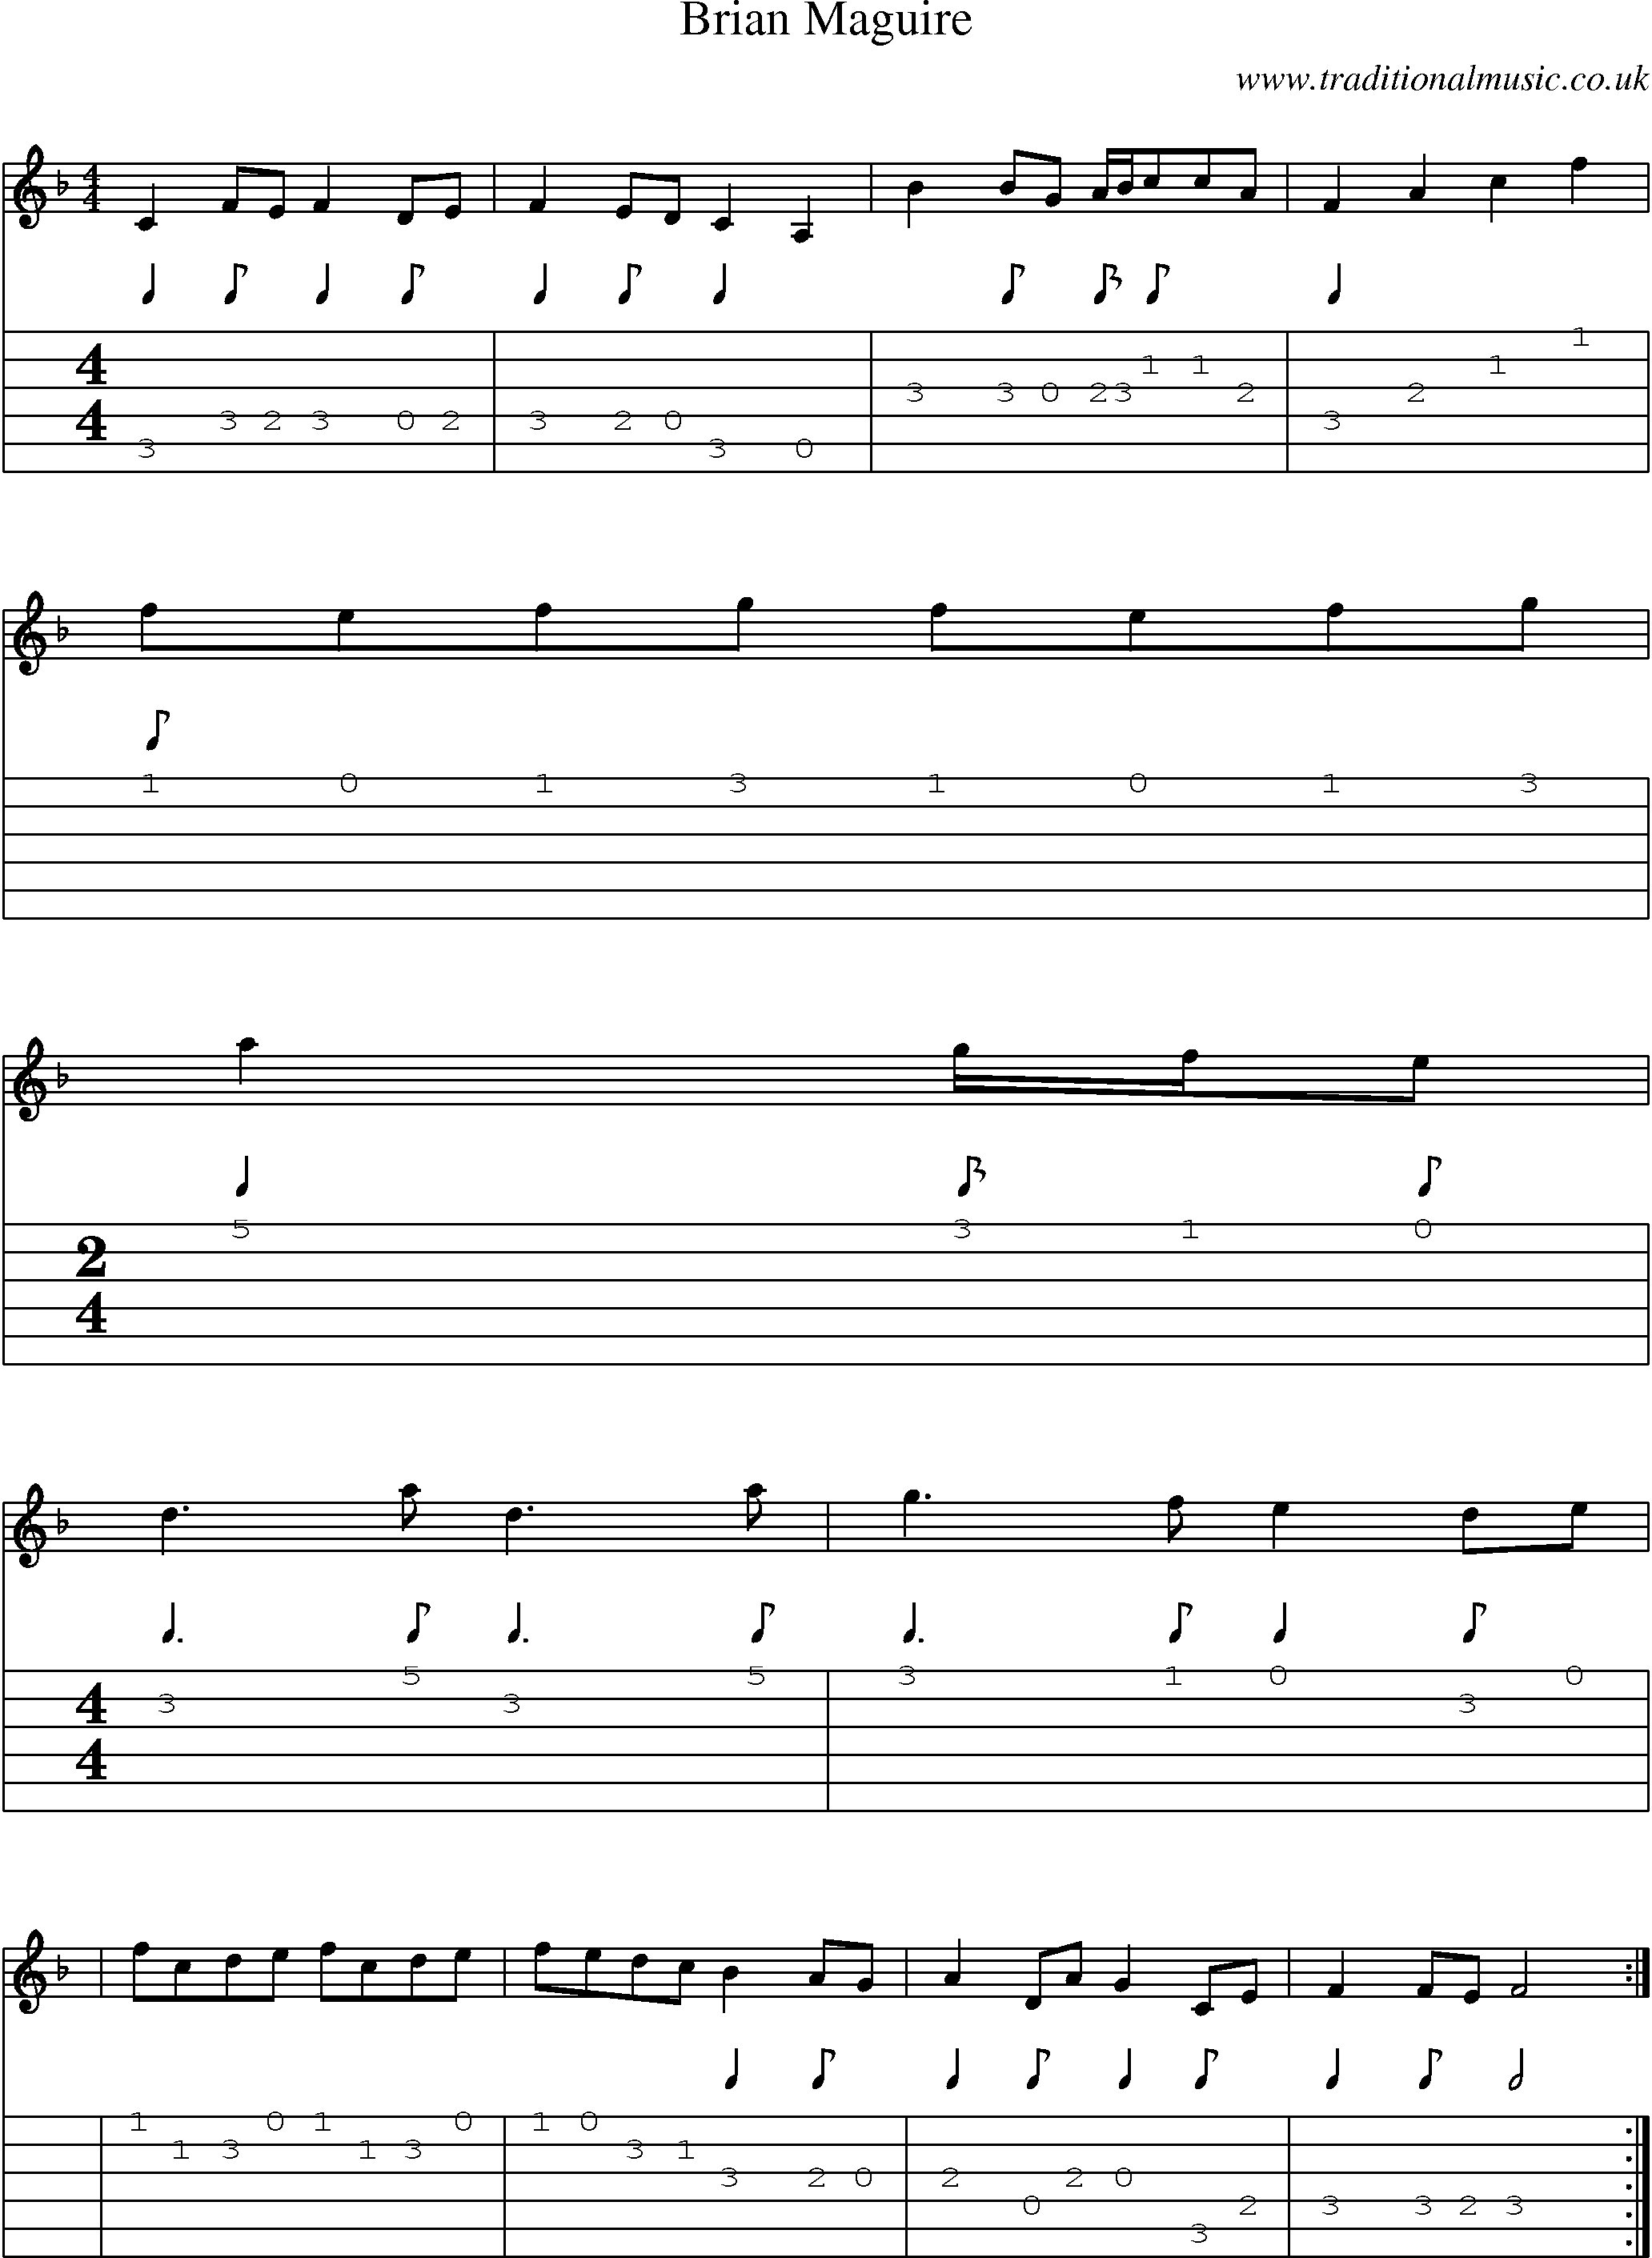 Music Score and Guitar Tabs for Brian Maguire